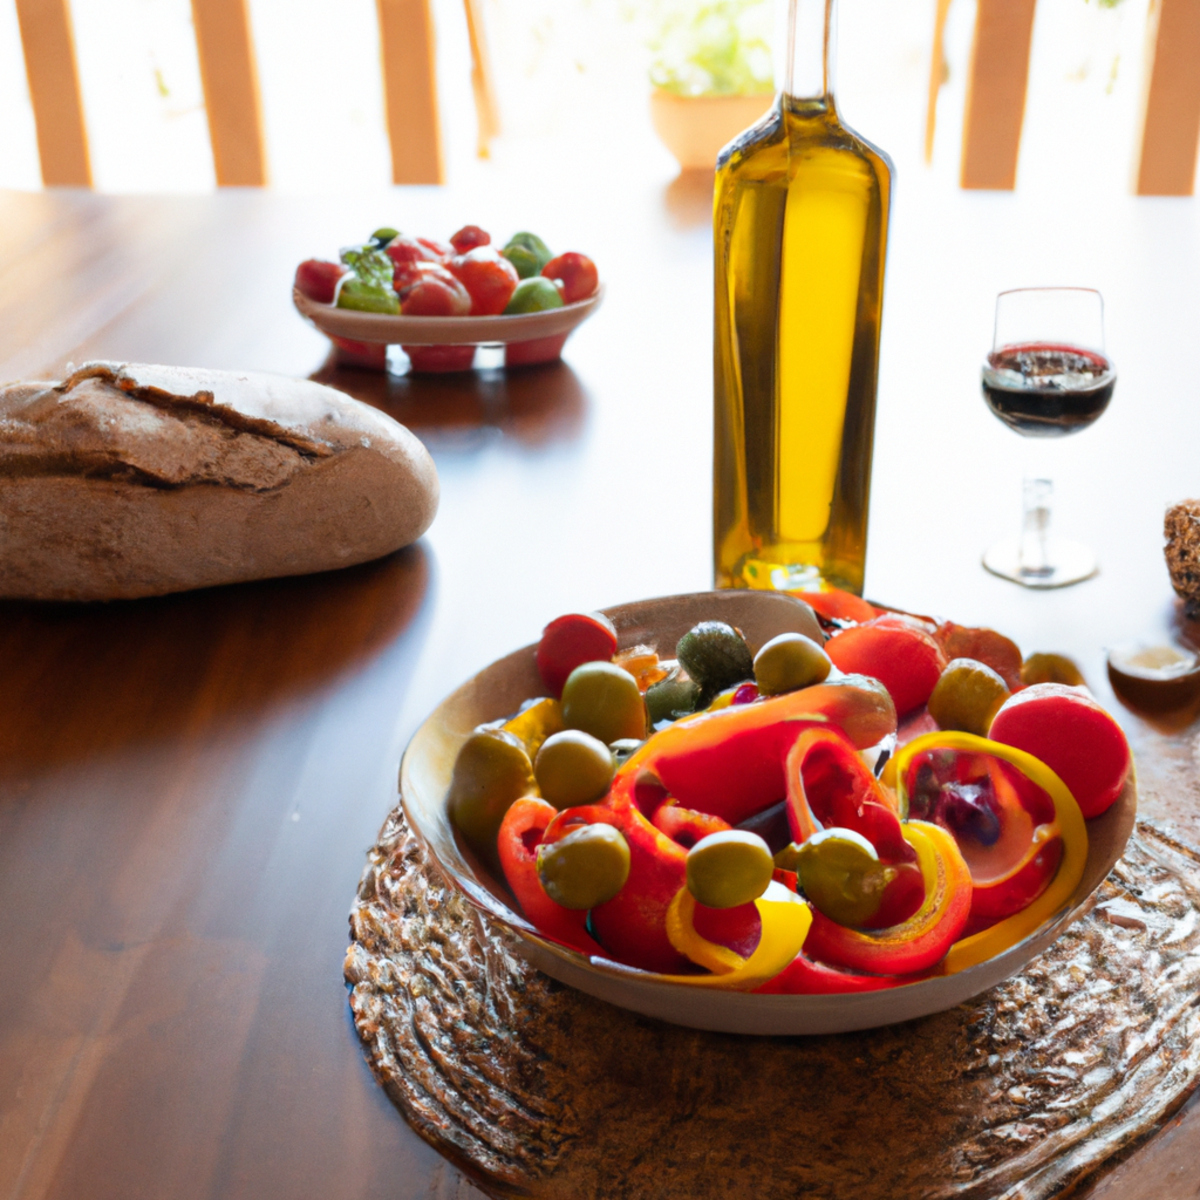 The photo depicts a wooden table with a plate of colorful vegetables, including tomatoes, cucumbers, and bell peppers, arranged in a circular pattern. Next to the plate is a small bowl of olives and a glass of red wine. In the background, a loaf of crusty bread and a bottle of olive oil can be seen. The natural lighting highlights the vibrant colors of the vegetables and the rustic texture of the wooden table, evoking a sense of warmth and simplicity. This lifelike photo perfectly captures the essence of the Mediterranean diet and its emphasis on fresh, whole foods.